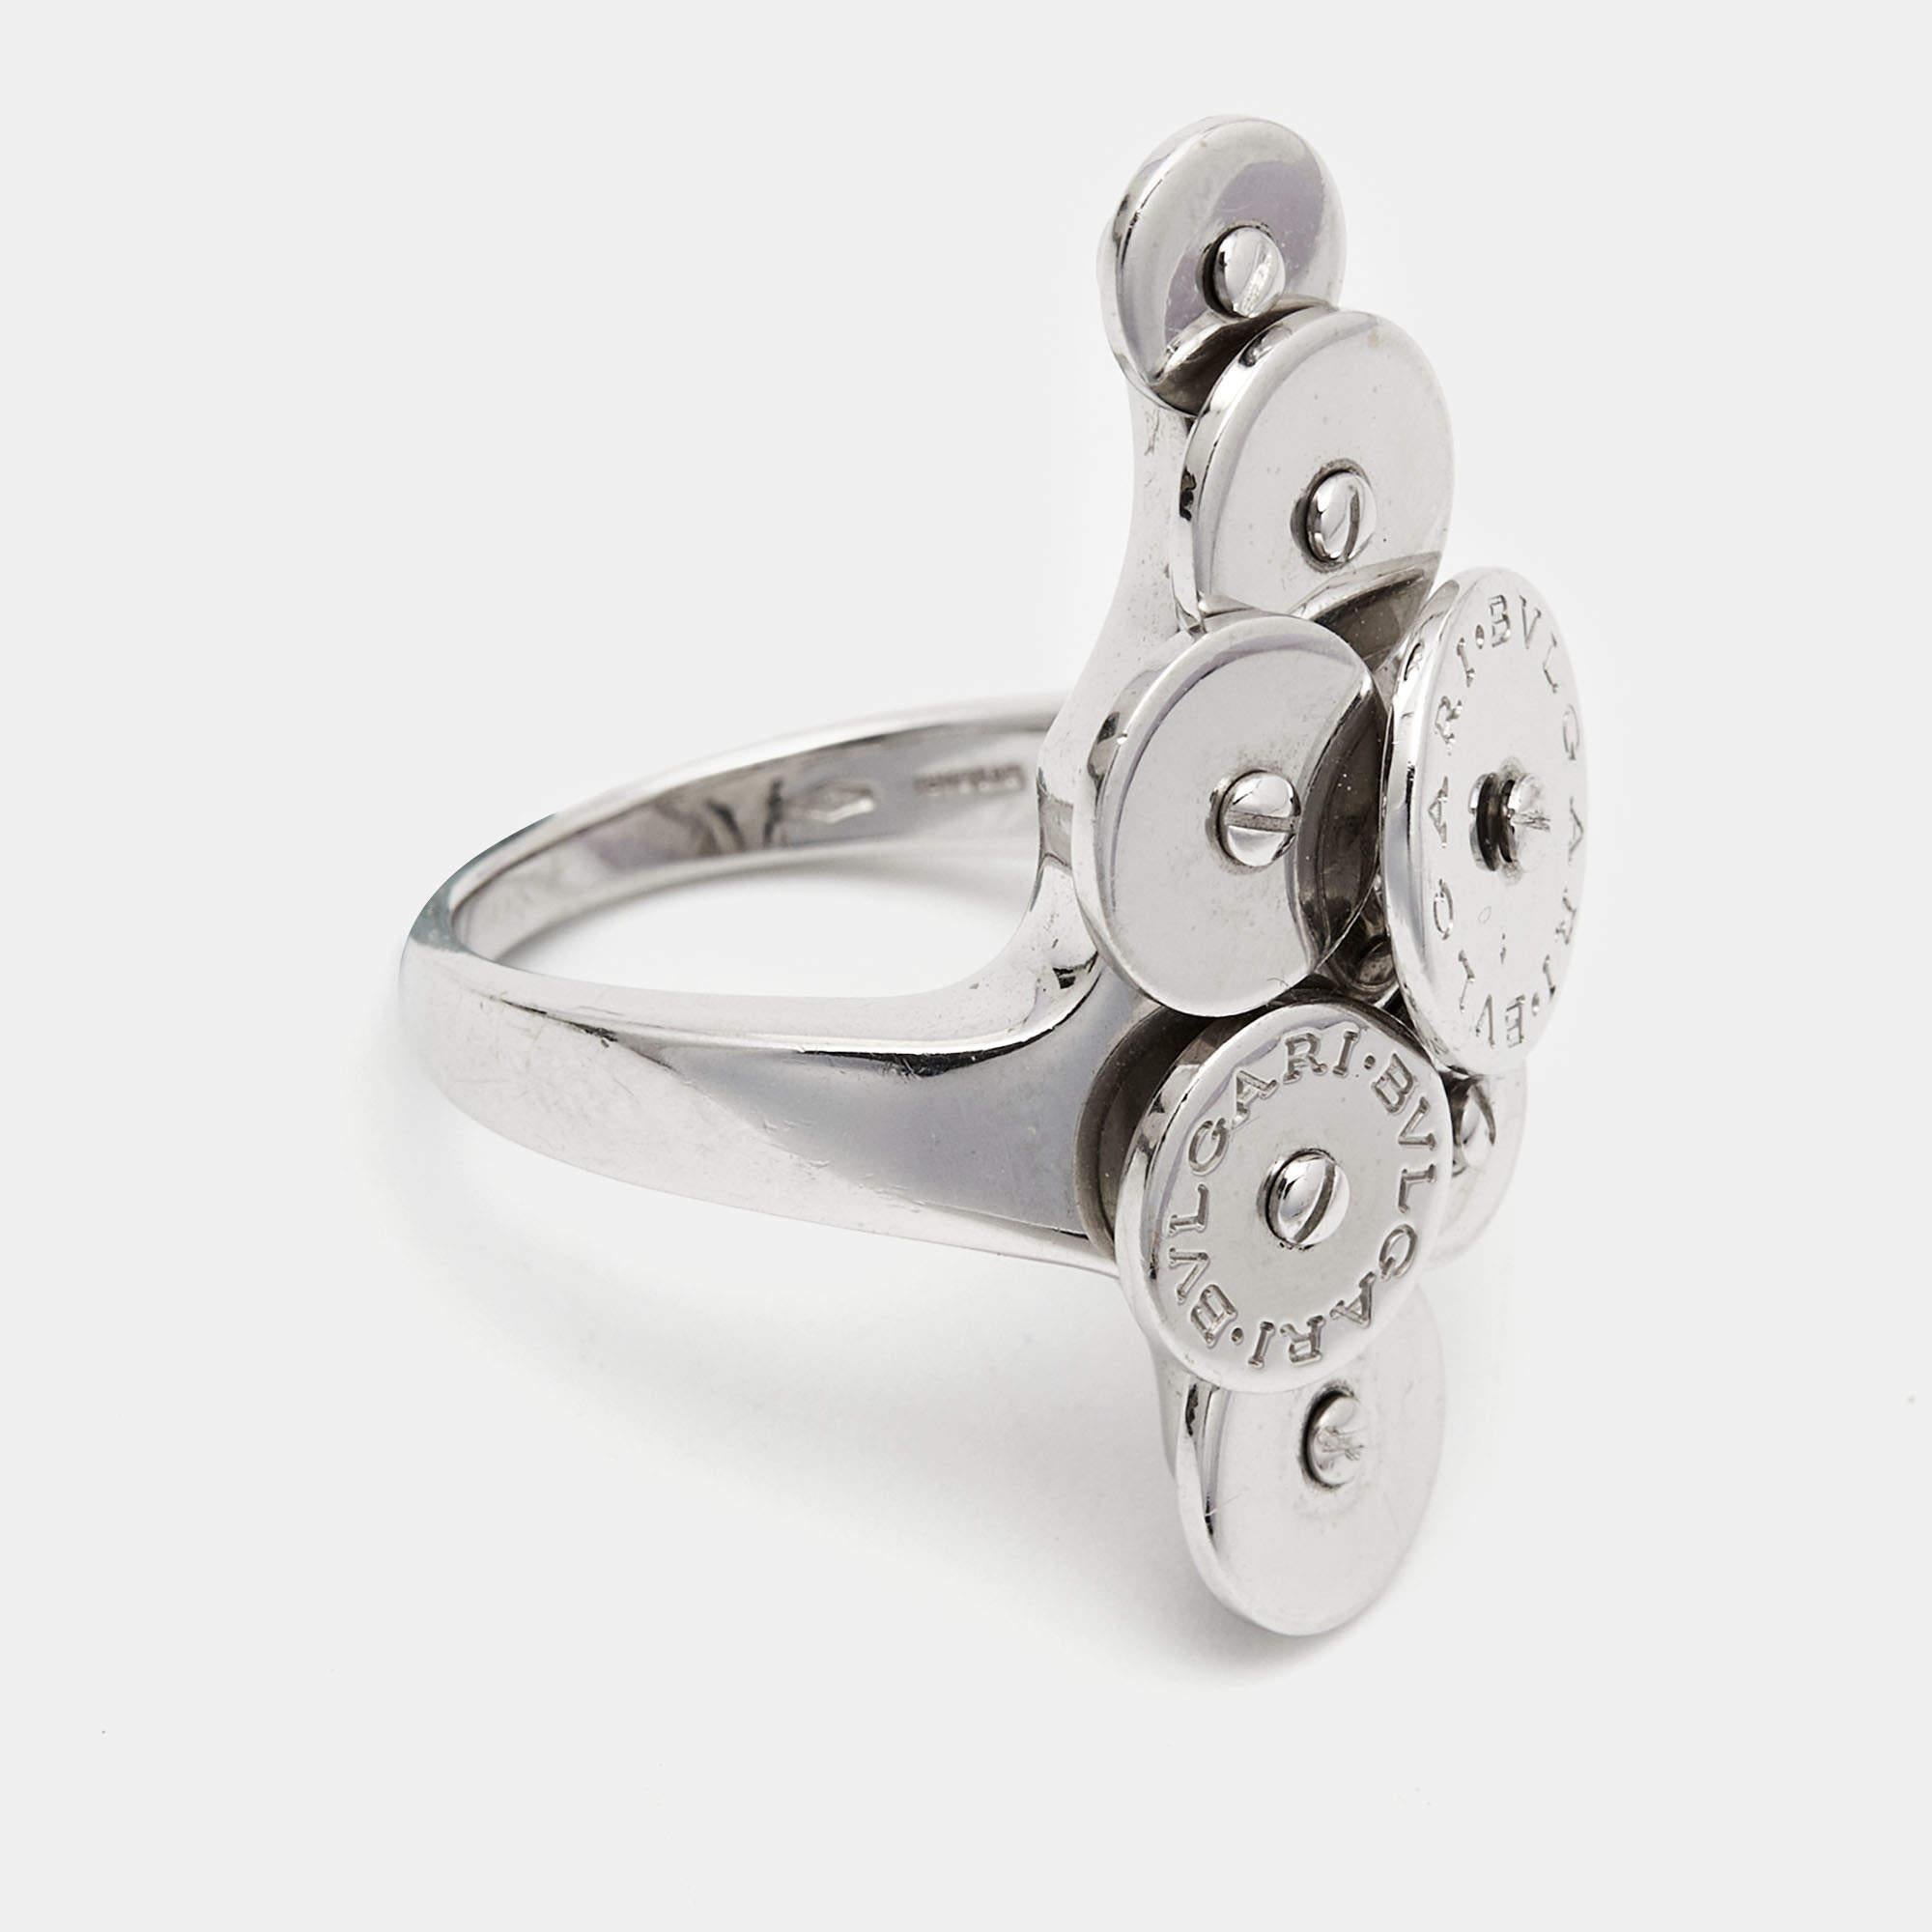 Bvlgari brings to you this wonderful Cicladi ring to adorn you with sheer elegance and luxury. Made out of 18K white gold, this piece features 7 round plate-like details that rotate, and out of which two are engraved with the brand signature. High